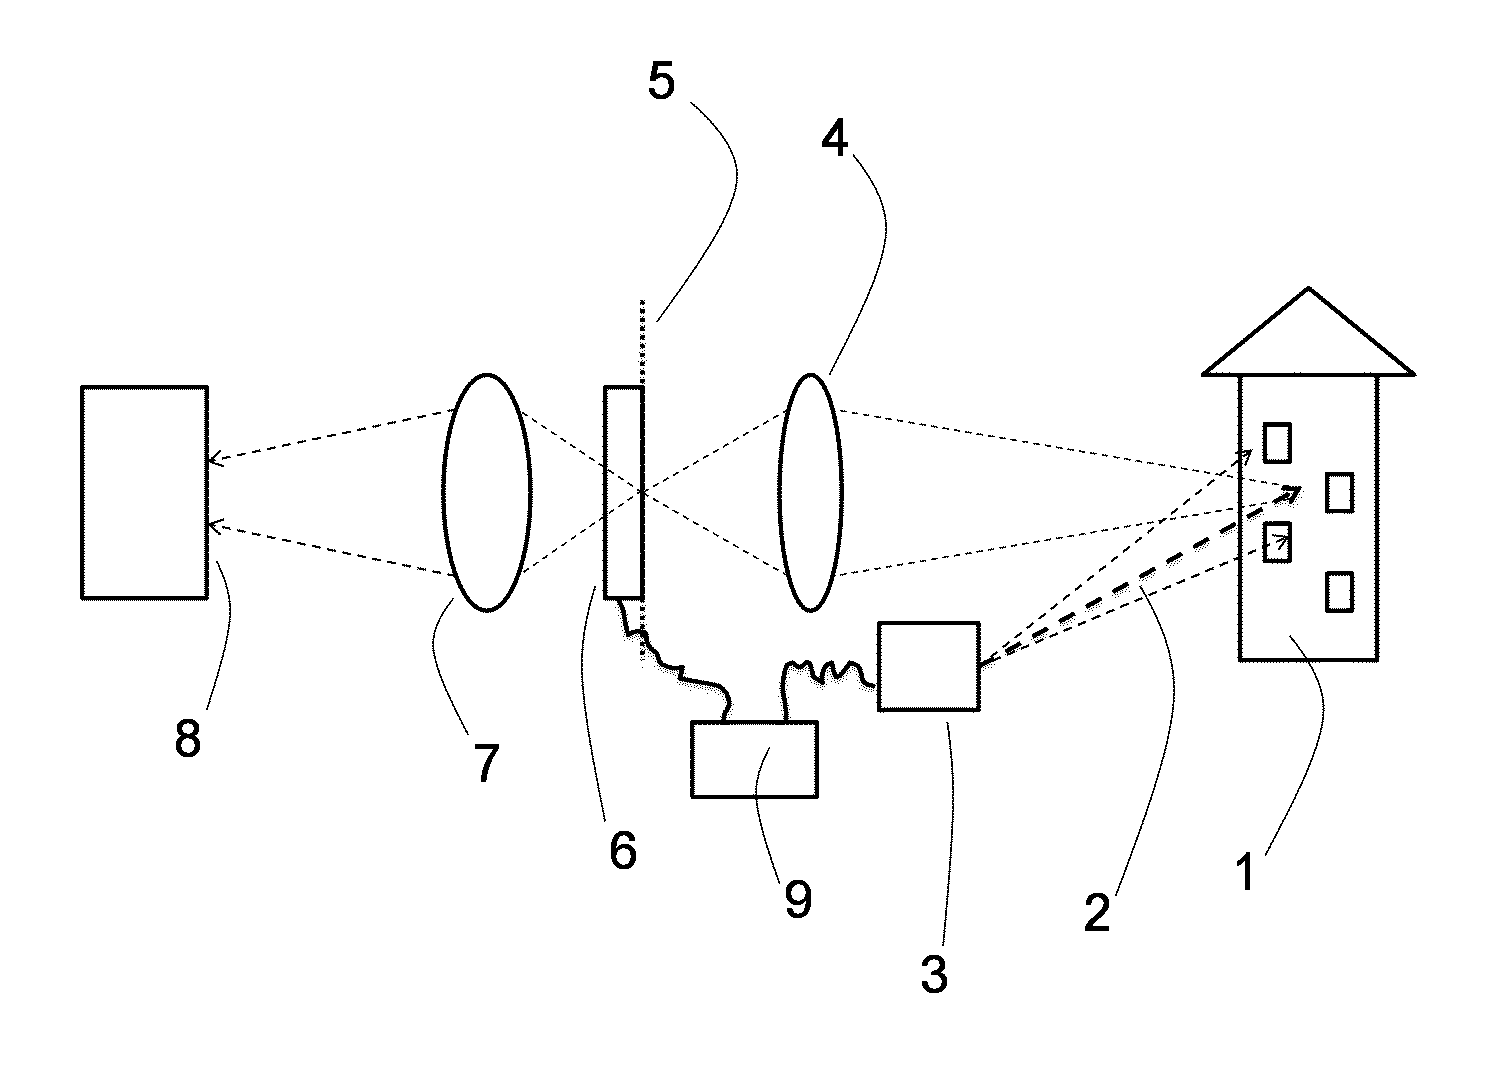 Spatially selective detection using a dynamic mask in an image plane